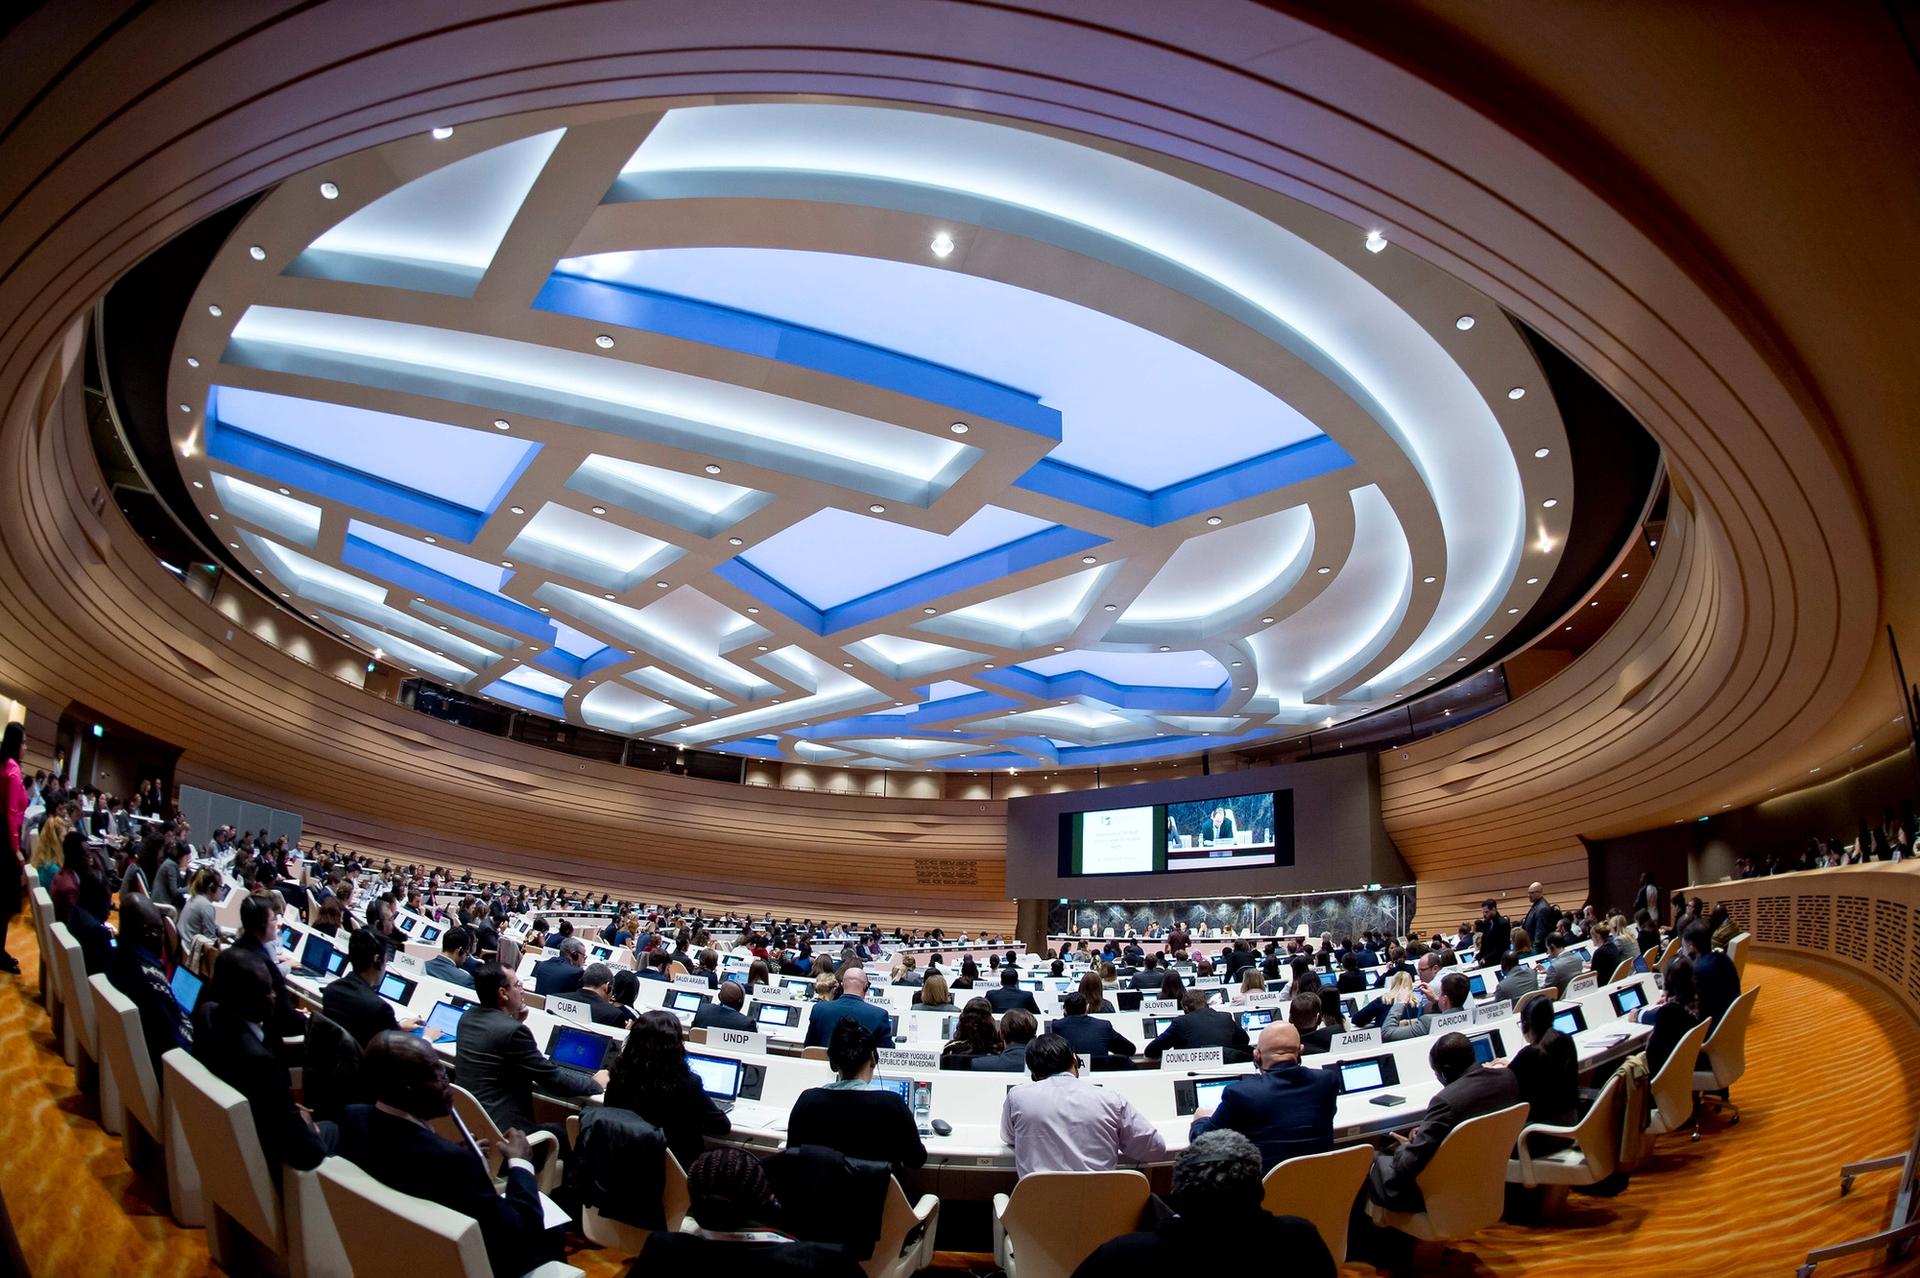 A distorted, fish-eye lens view of a UN conference. Hundreds of delegates sit at desks at a 2016 meeting on Human Rights, Democracy, and the Rule of Law in Geneva, Switzerland.